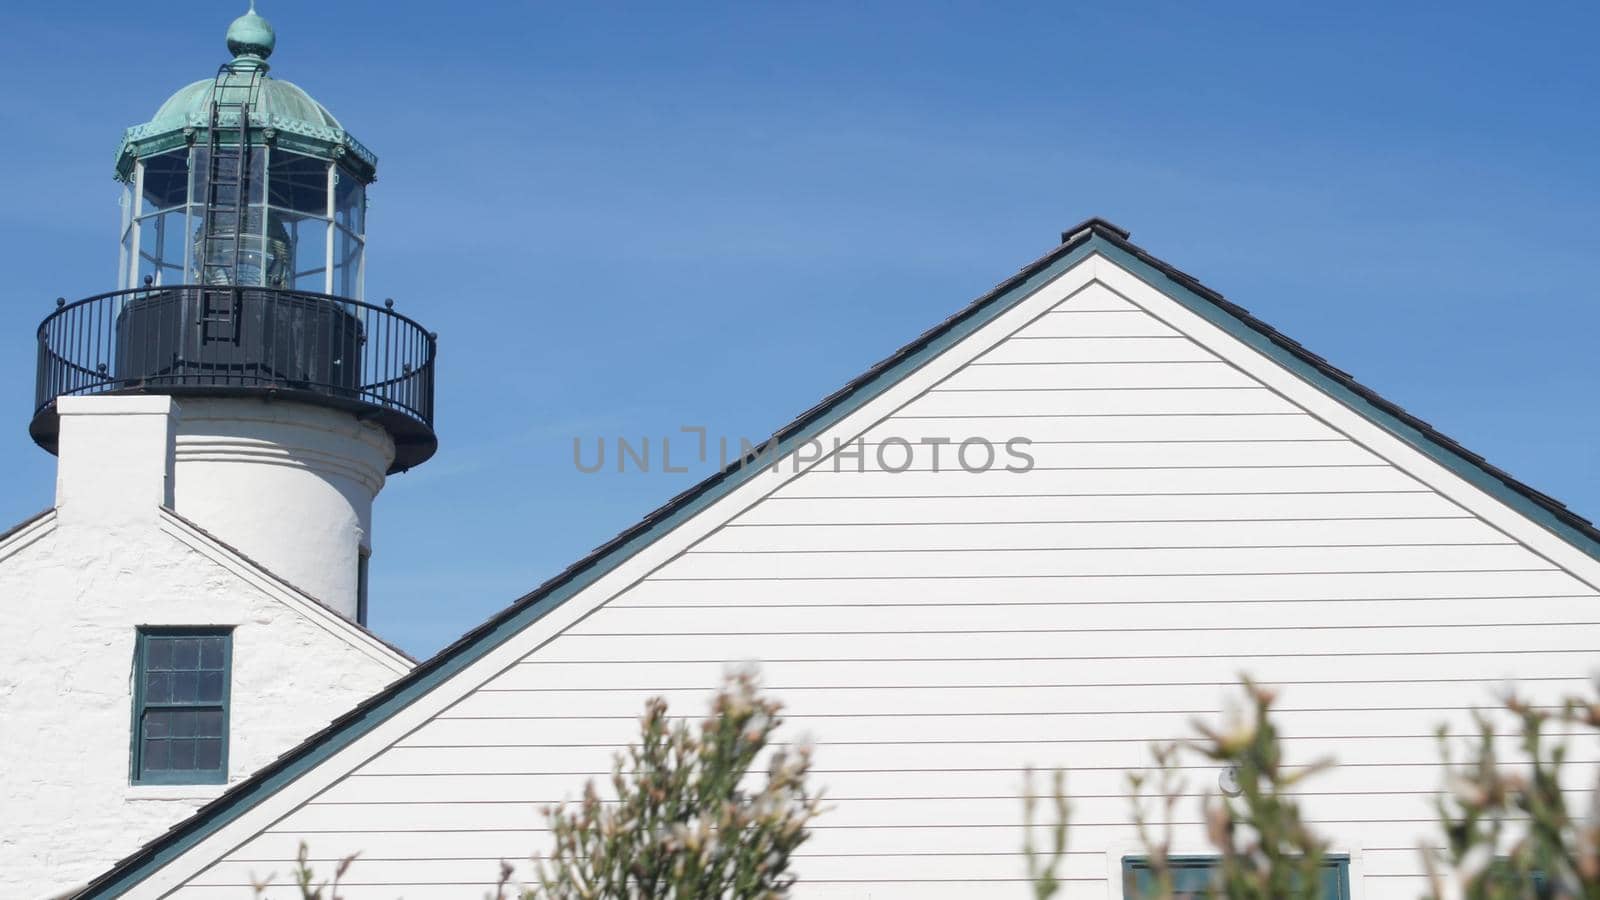 Vintage lighthouse tower, retro light house, old fashioned historic classic white beacon with fresnel lens. Nautical navigational coastal building 1855. Point Loma, Cabrillo, San Diego, California USA